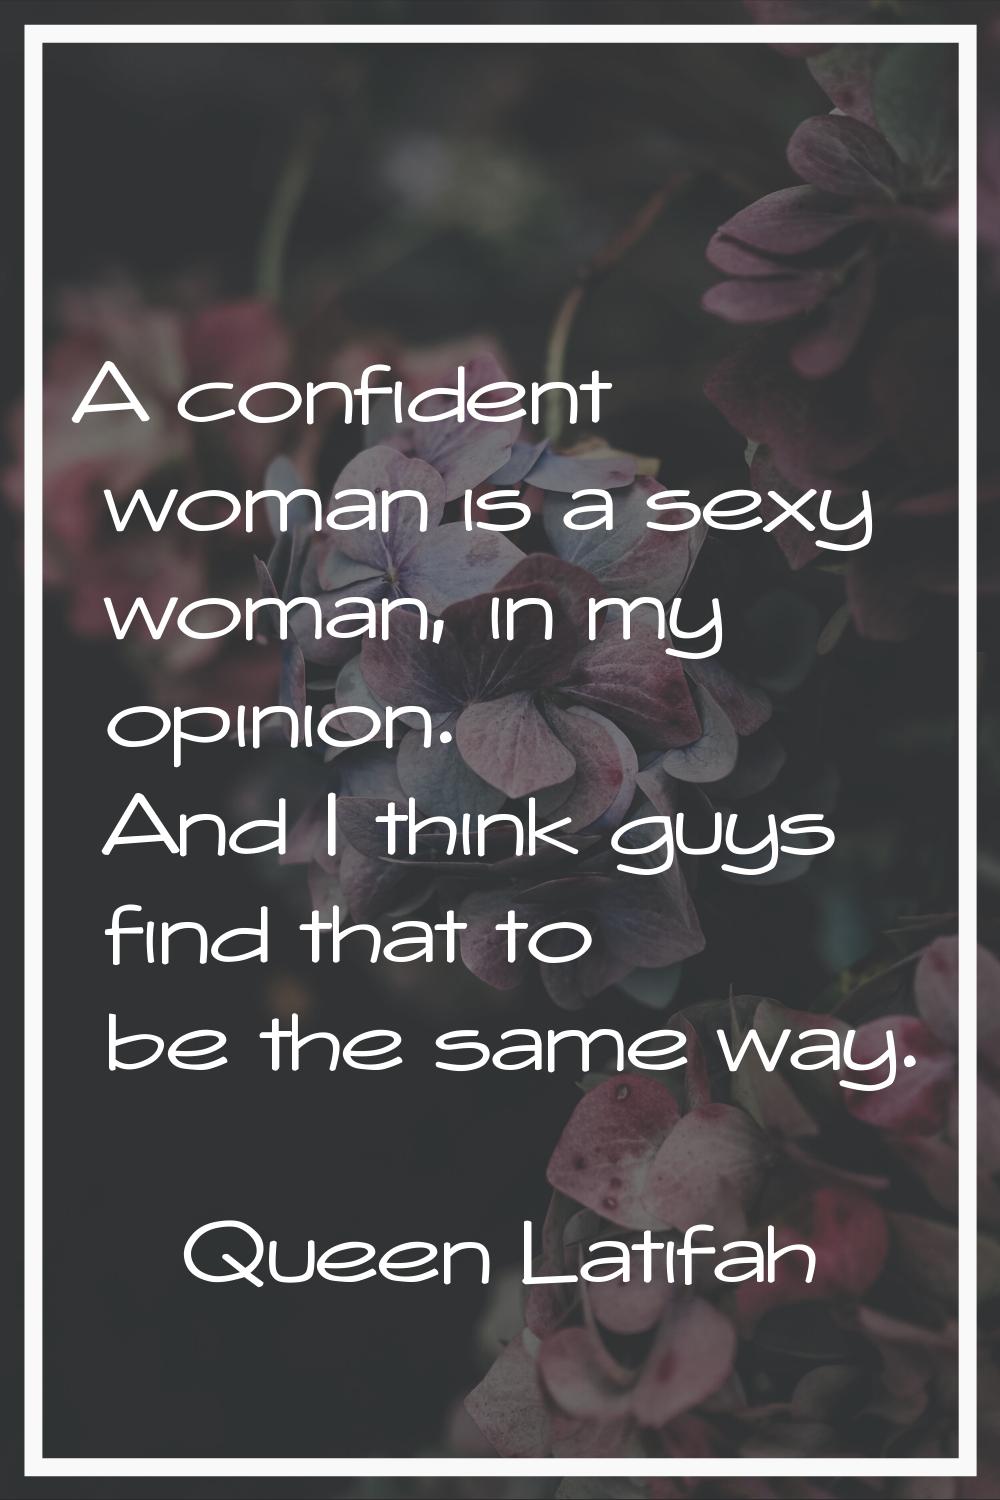 A confident woman is a sexy woman, in my opinion. And I think guys find that to be the same way.